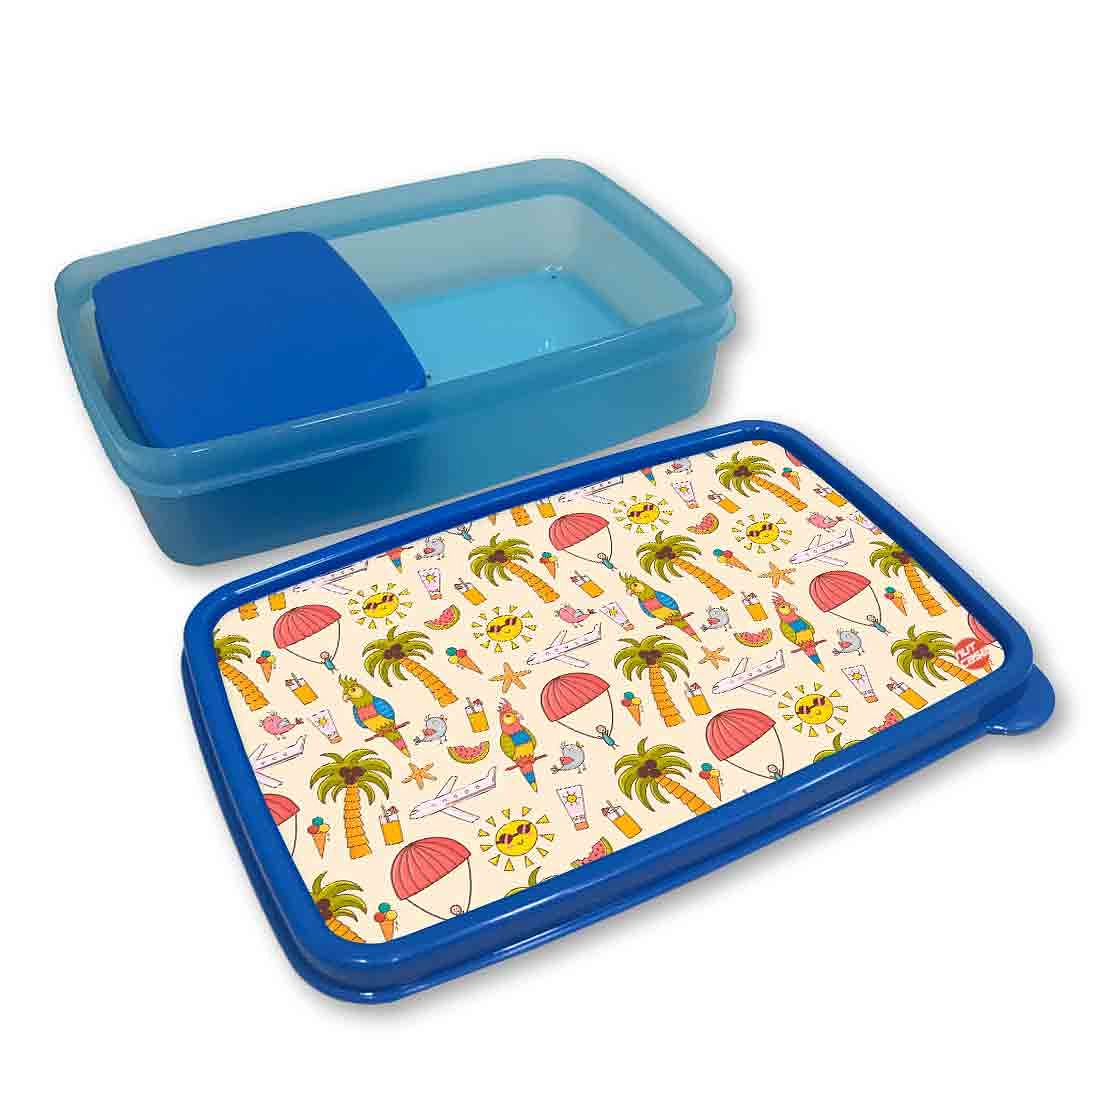 Best Snacks Storage Box for School Boys With Small Container - Summer Time Nutcase